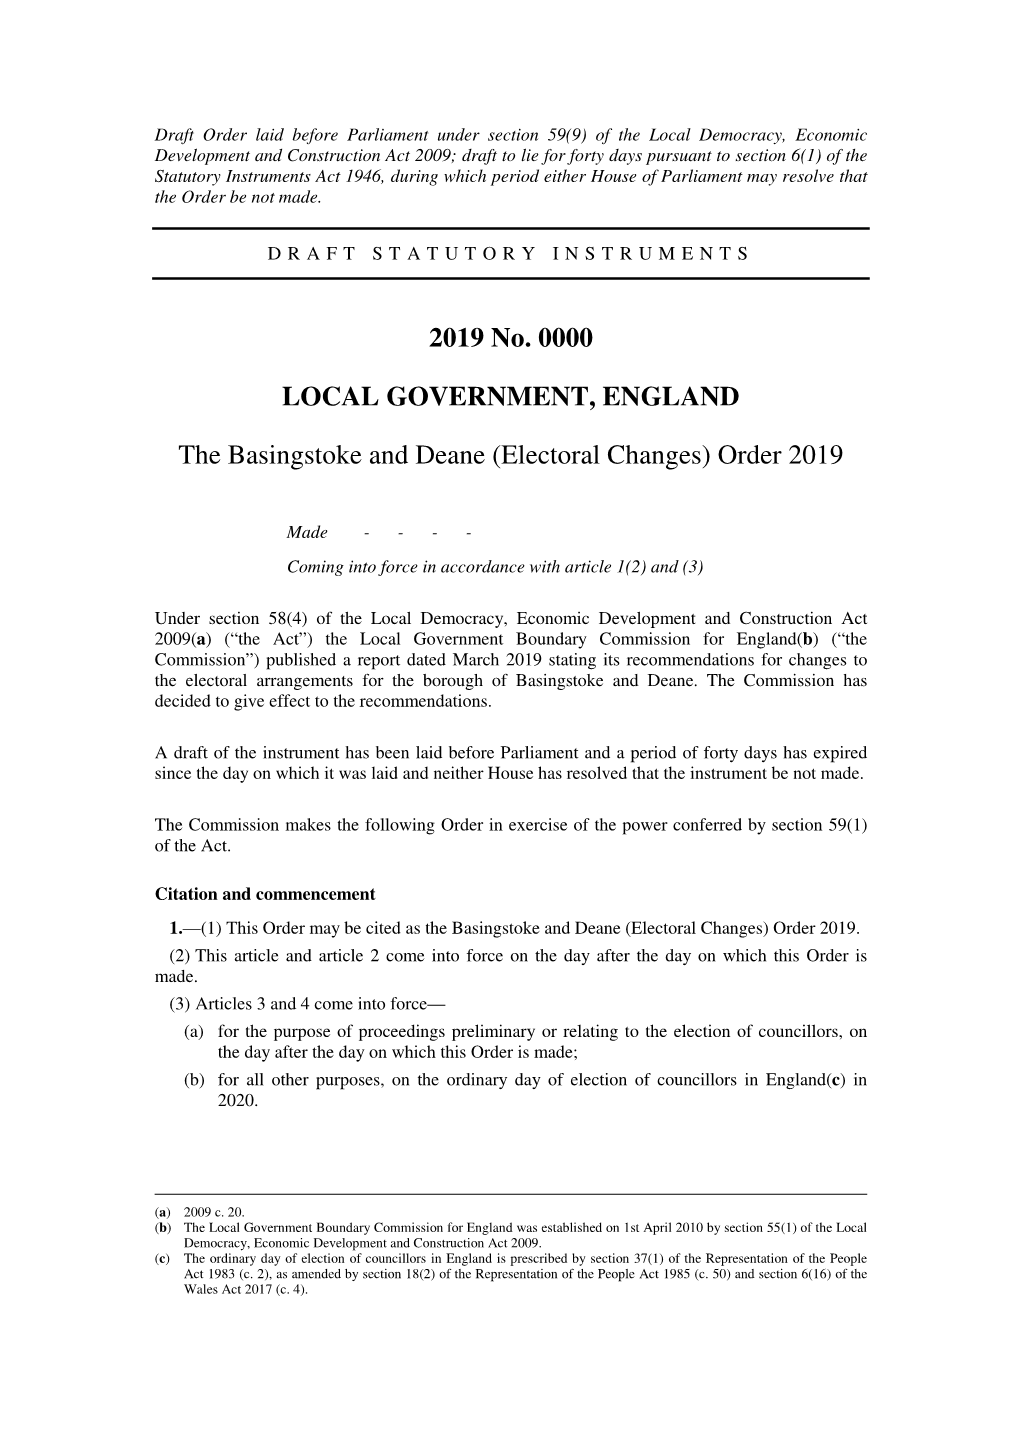 The Basingstoke and Deane (Electoral Changes) Order 2019